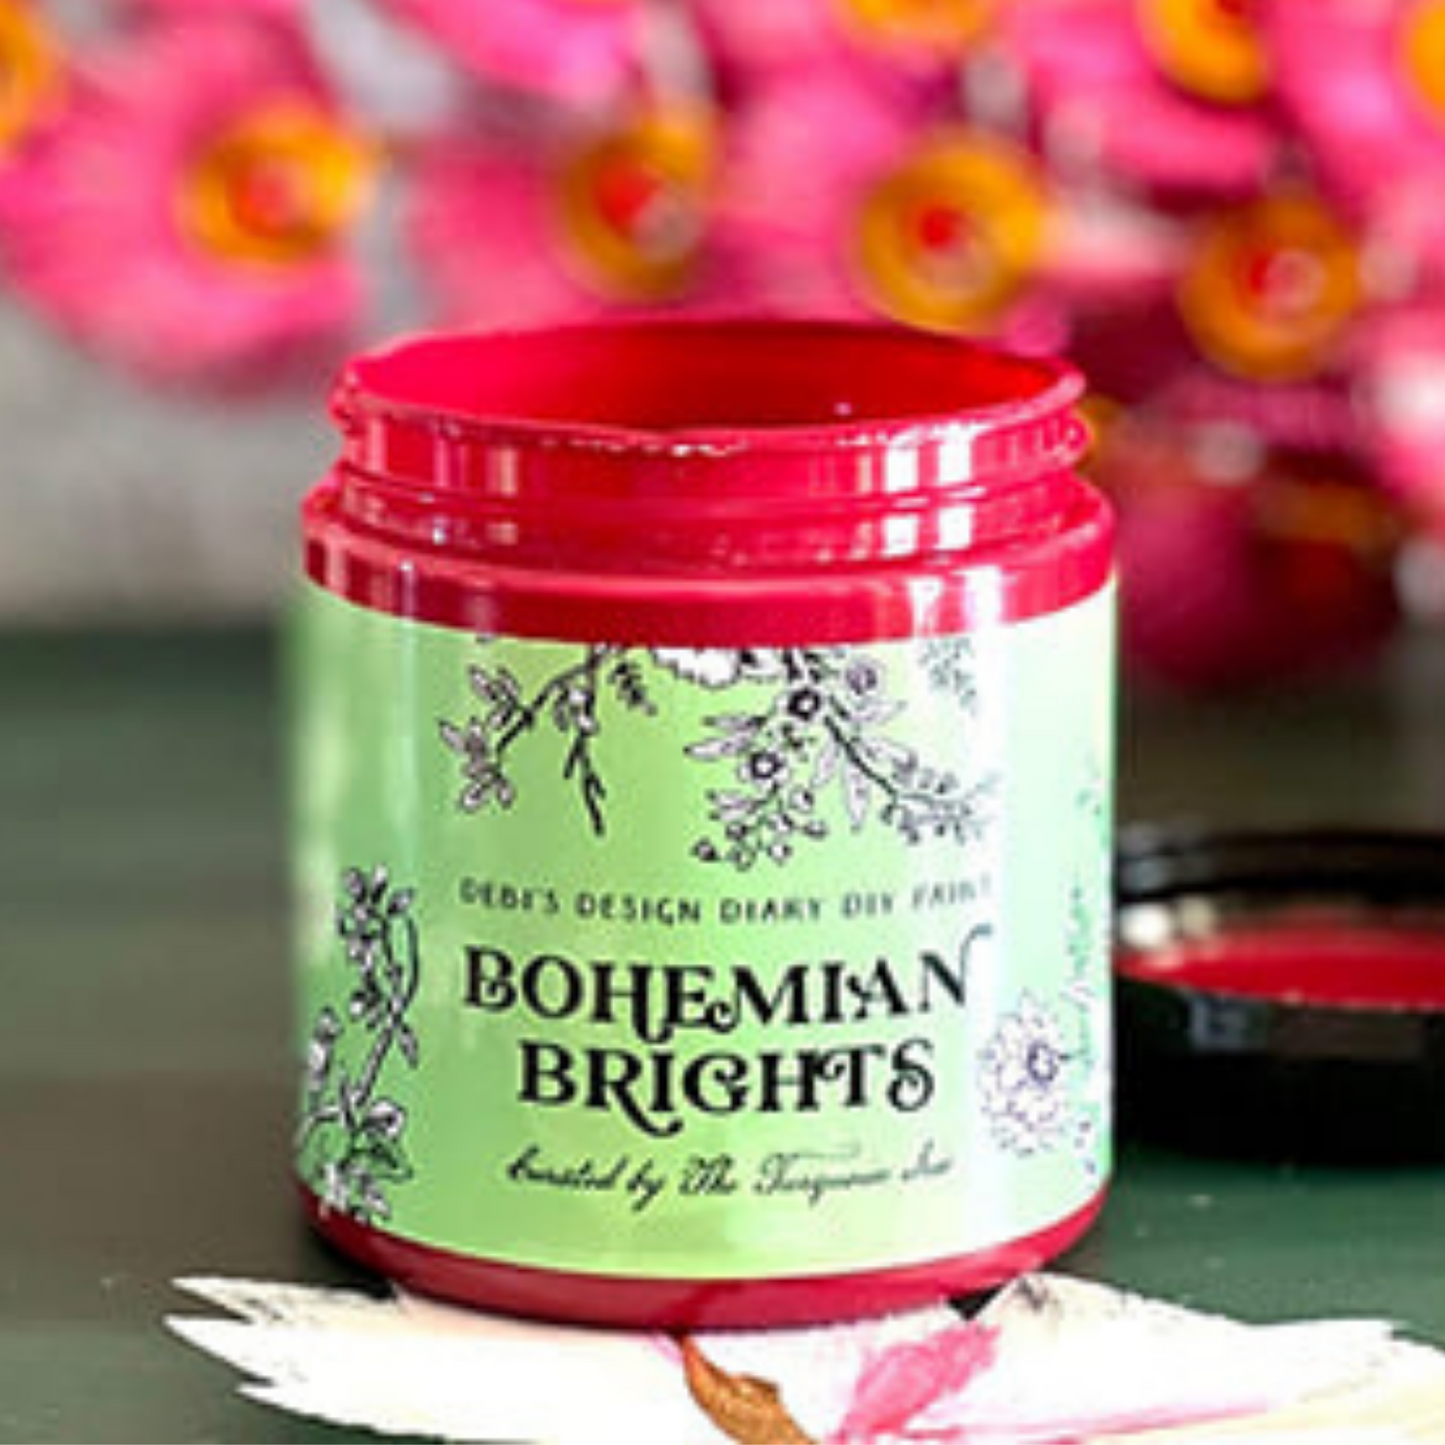 Color "Adored Chaos"  from the Bohemian Brights collection by Debi's Design Diary DIY Paint. 4 oz. jar available at Milton's Daughter. Curated by Dionne Woods of the Turquoise Iris.